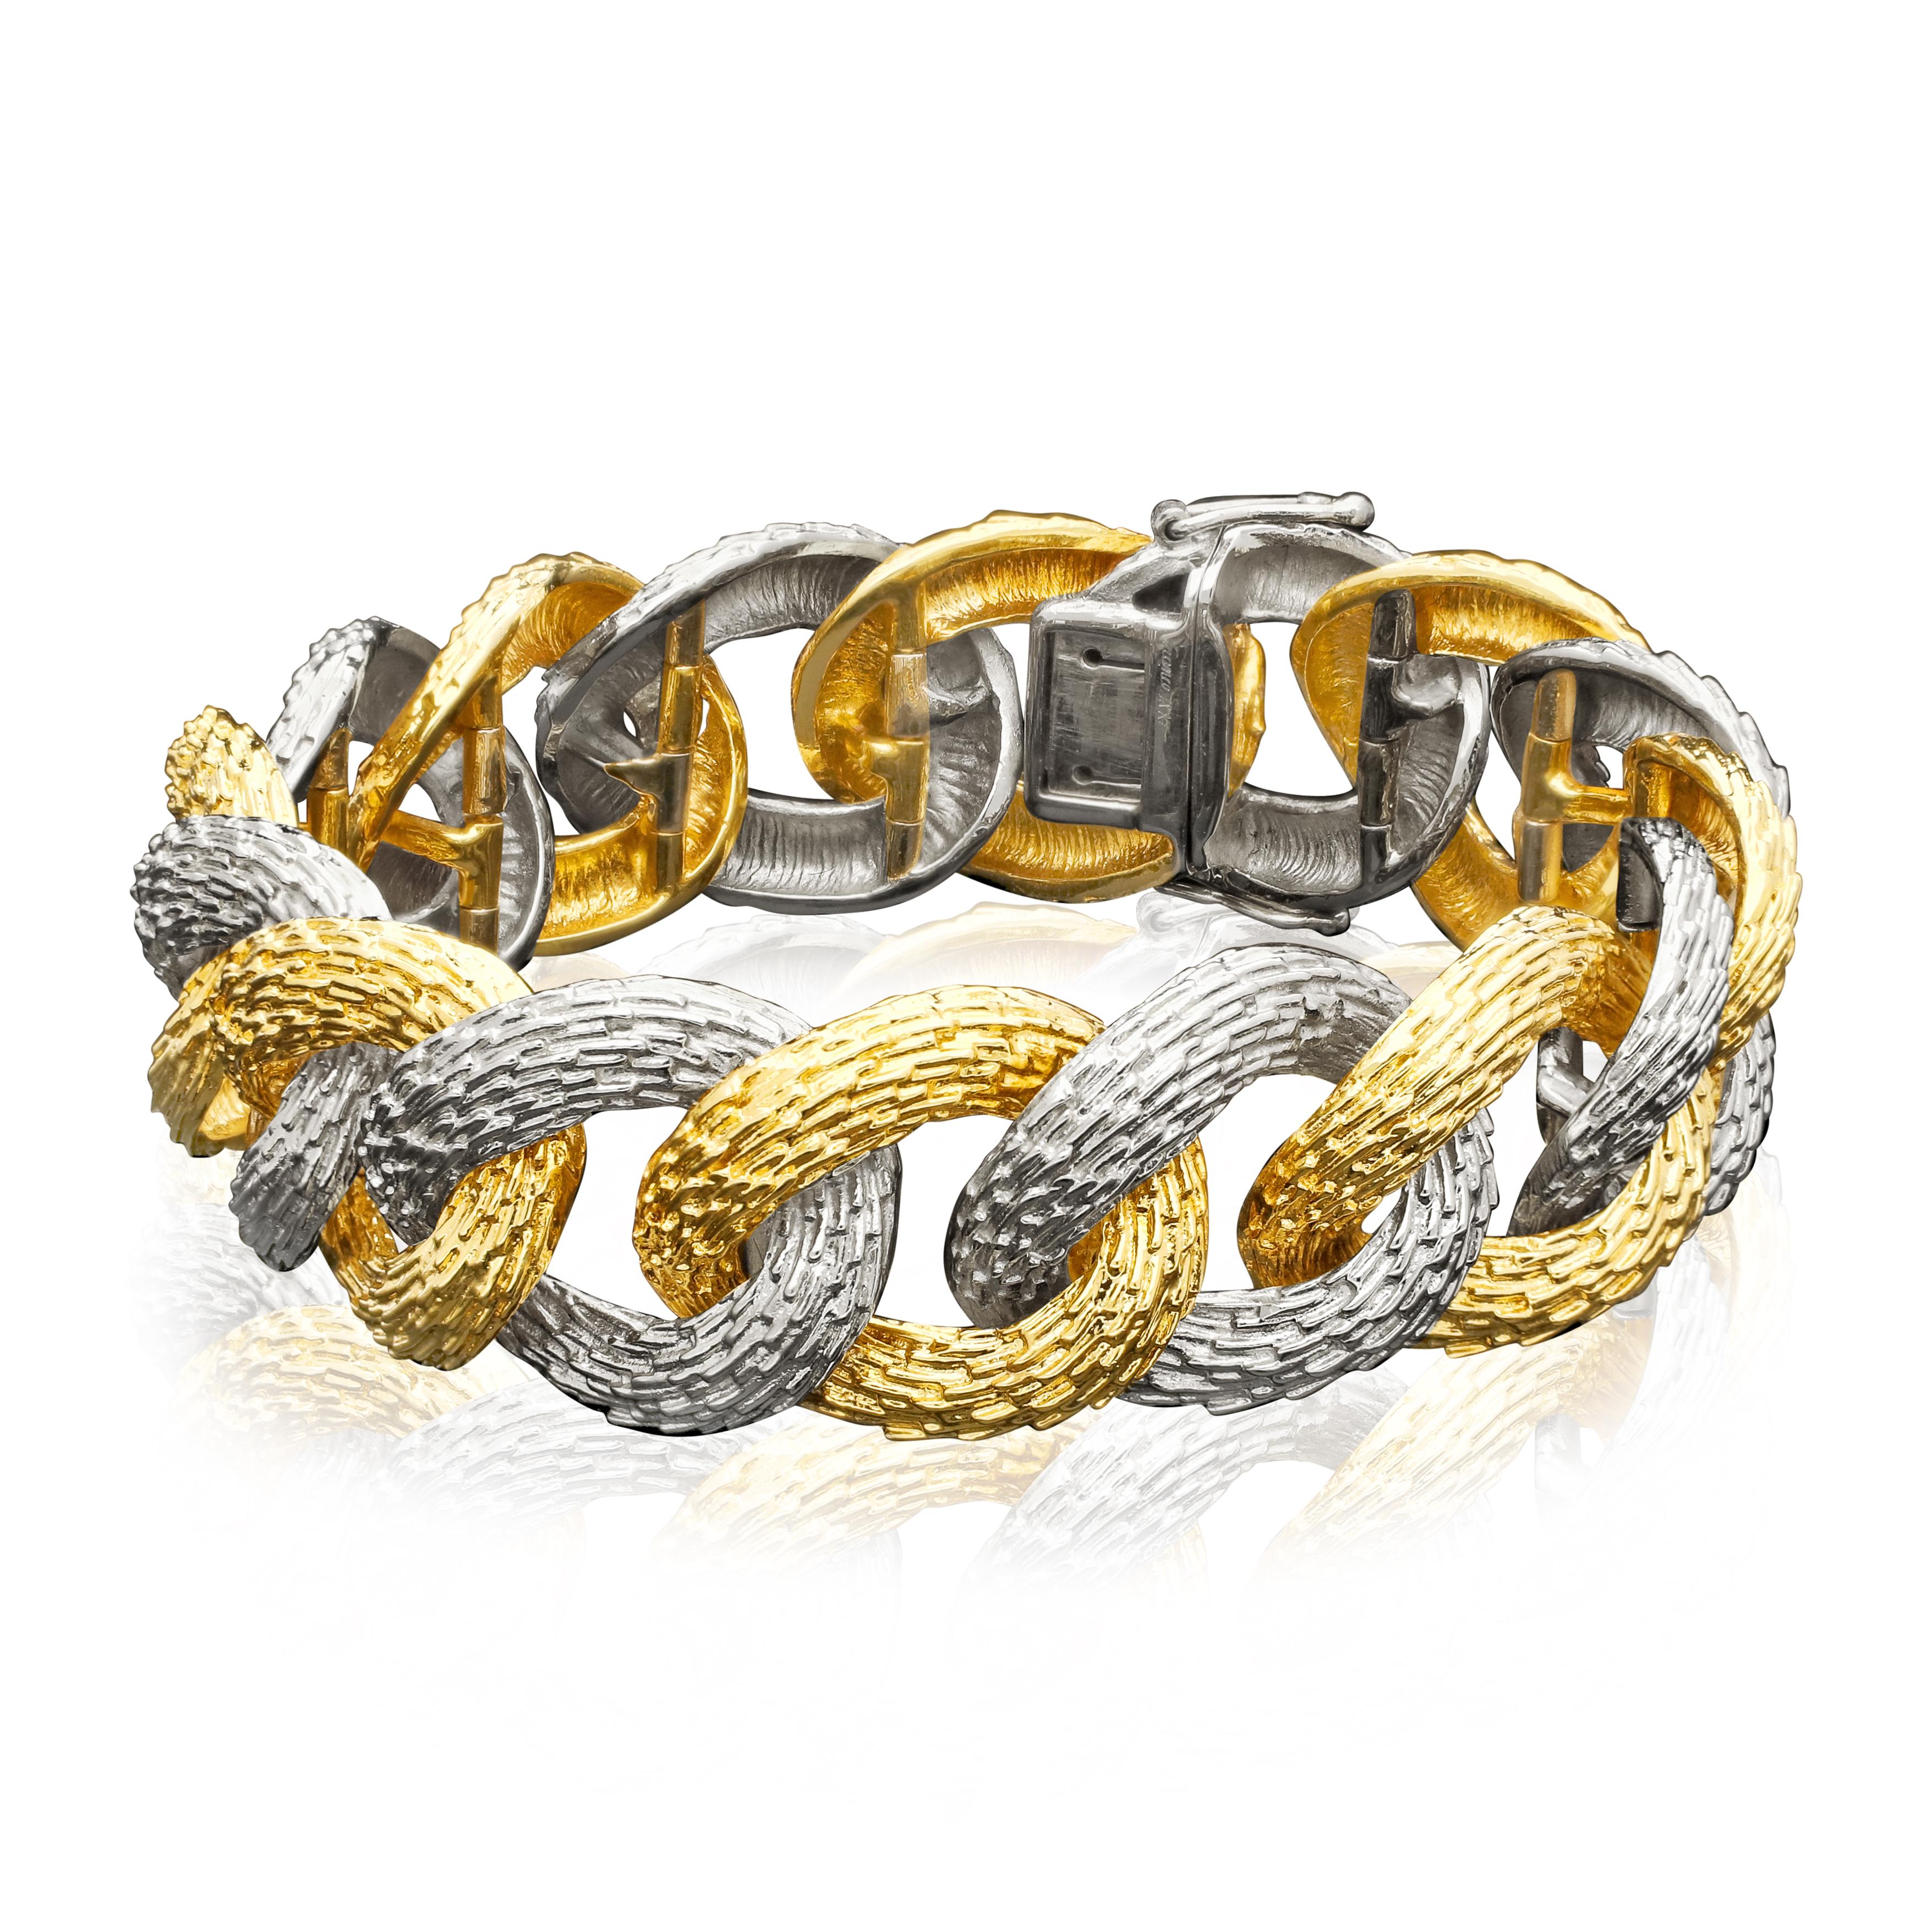 A stylish French vintage two tone gold bracelet c.1970s, composed of sixteen uniform links in heavily textured 18ct yellow or white gold arranged alternately, to a concealed tongue and box clasp. A classic style of the period, this bracelet is the